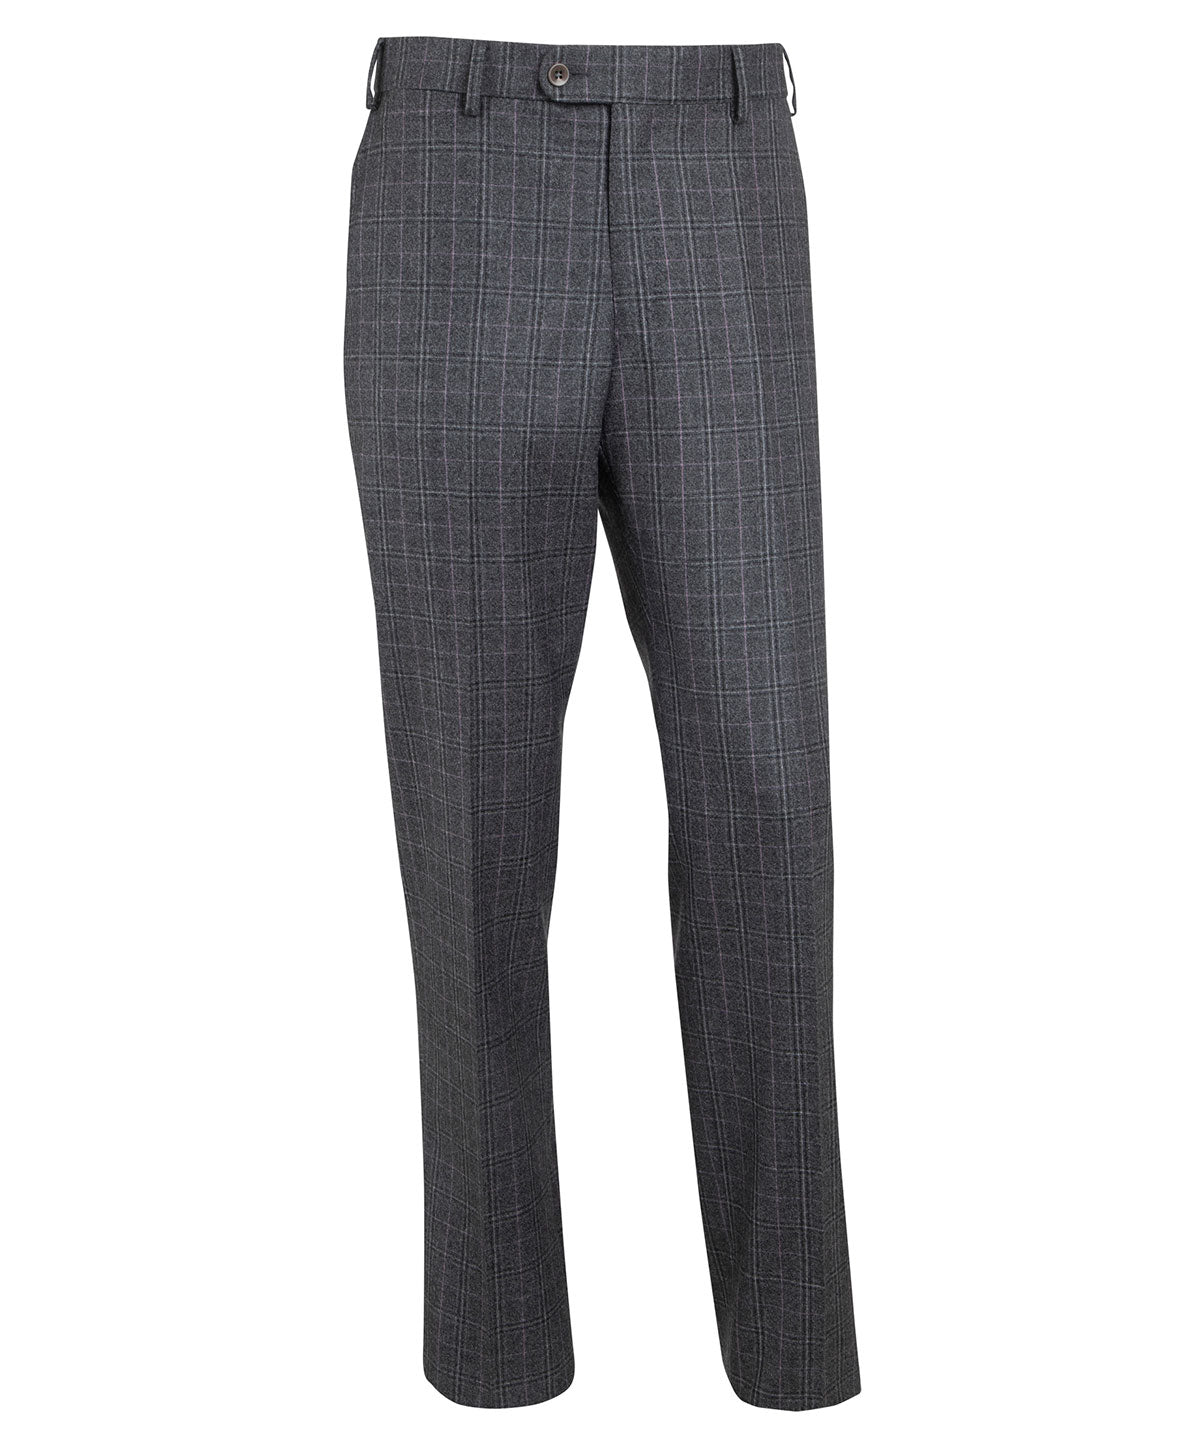 Heritage Flat Front Super 130s Check Pant